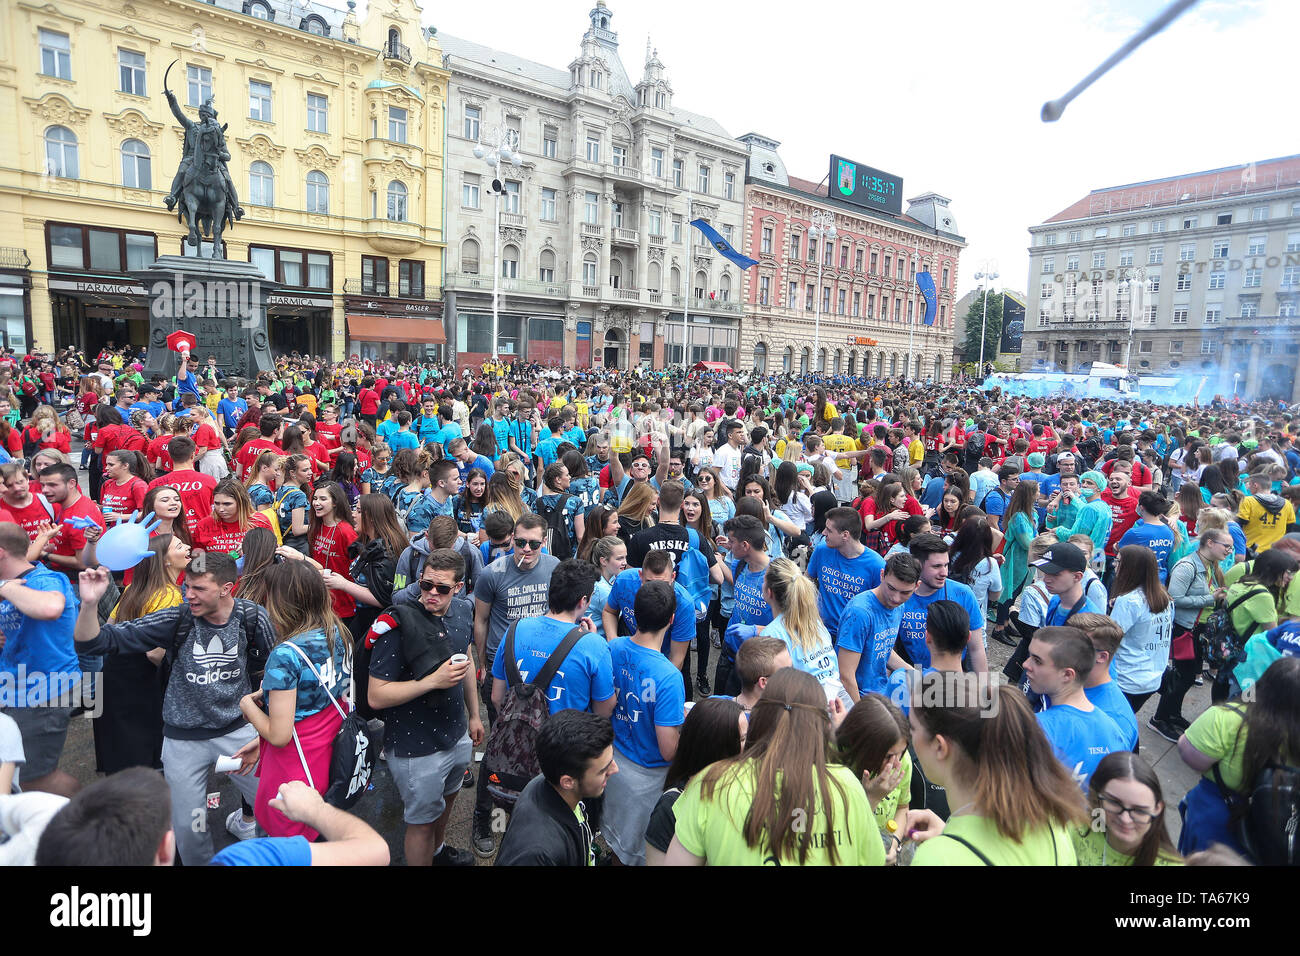 Zagreb, Croatia. 22nd May, 2019. Secondary school students celebrate the  end of a school year in Zadar, Croatia, on May 22, 2019. The celebration  "Norijada" (Crazy Day) is held annually nationwide to